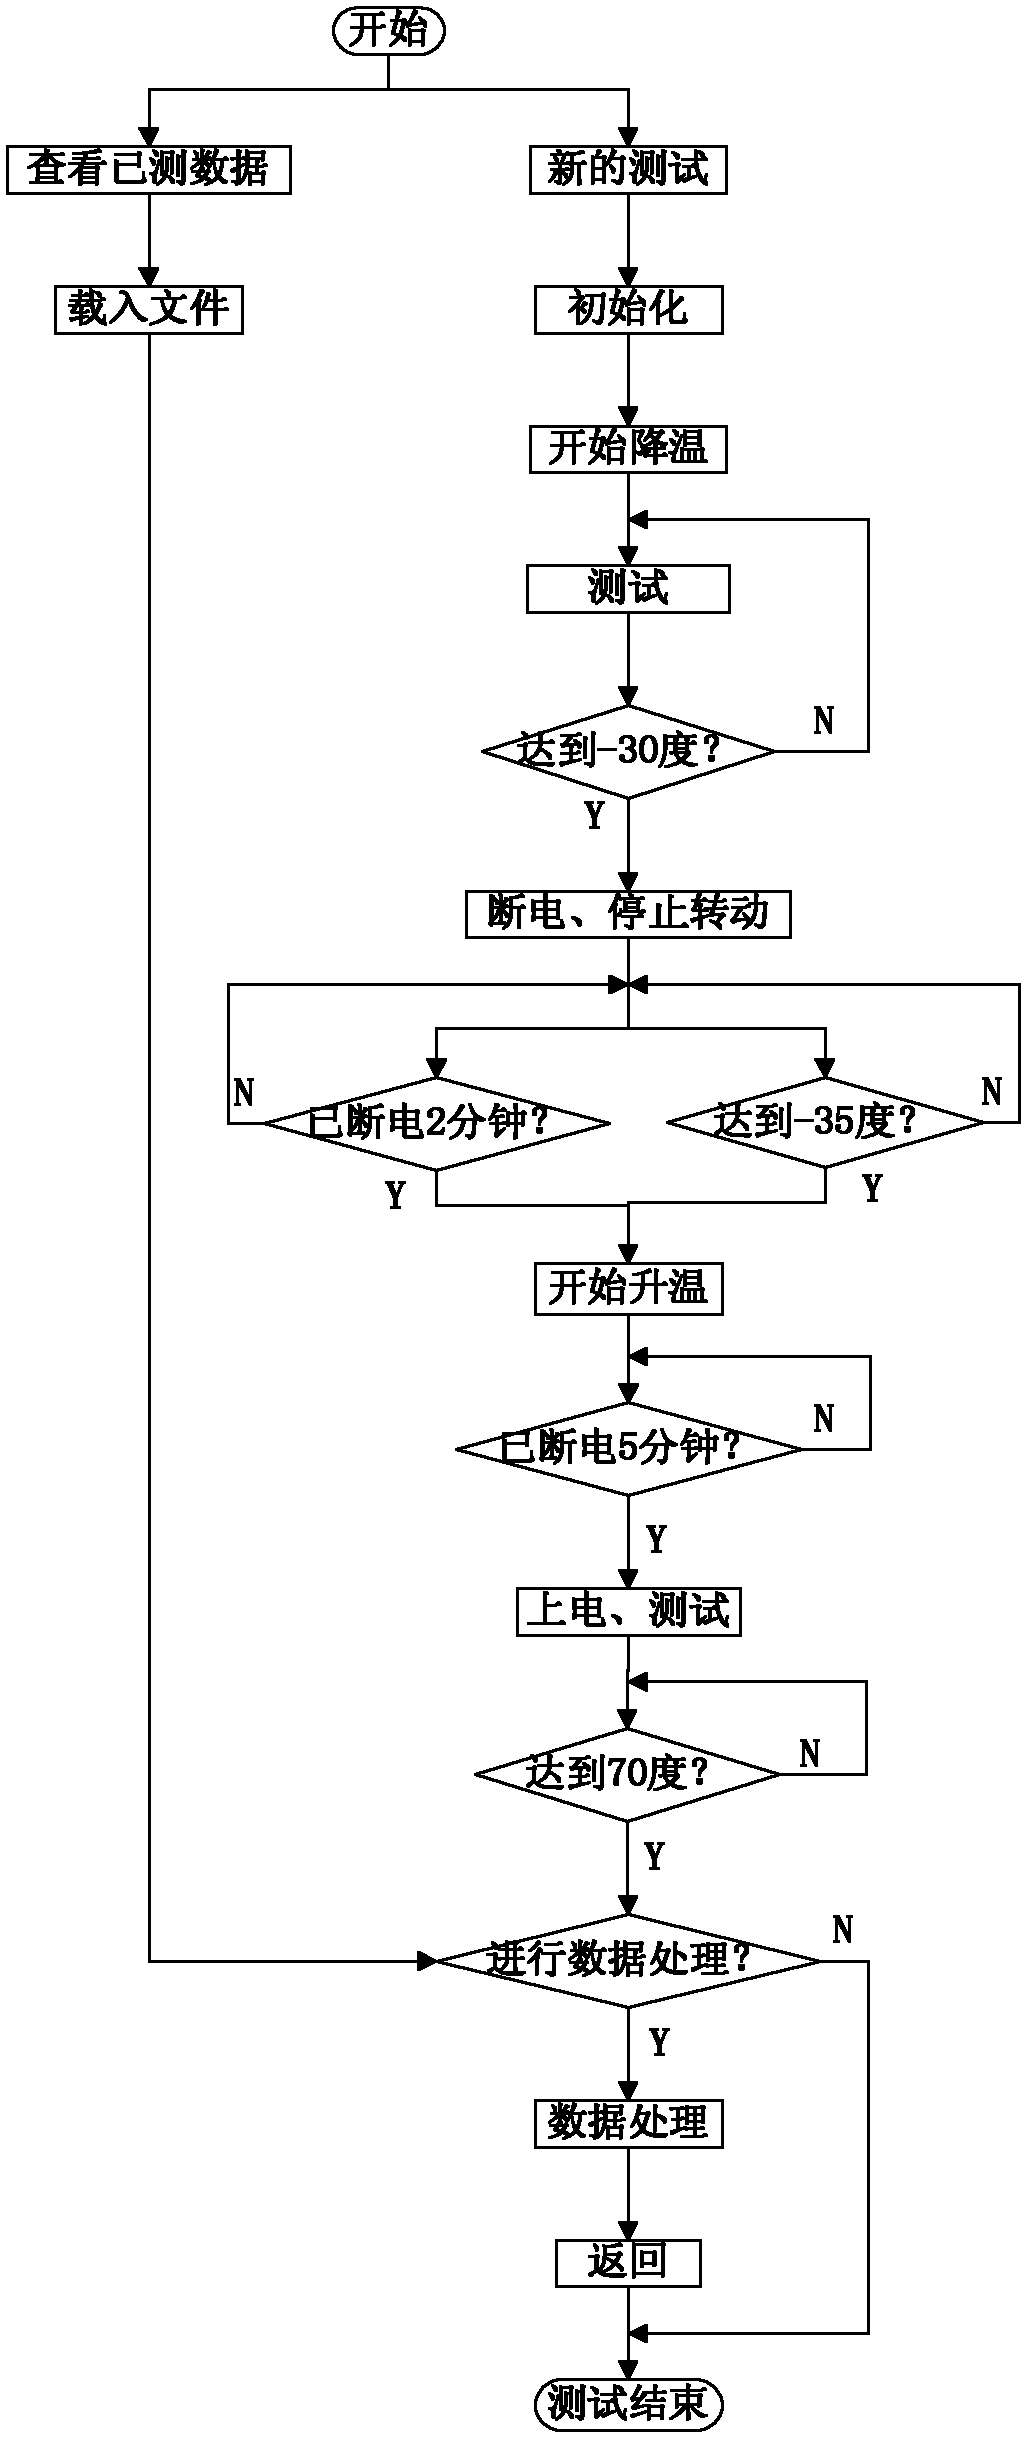 Automated testing system and method for index parameters of fiber optic gyro